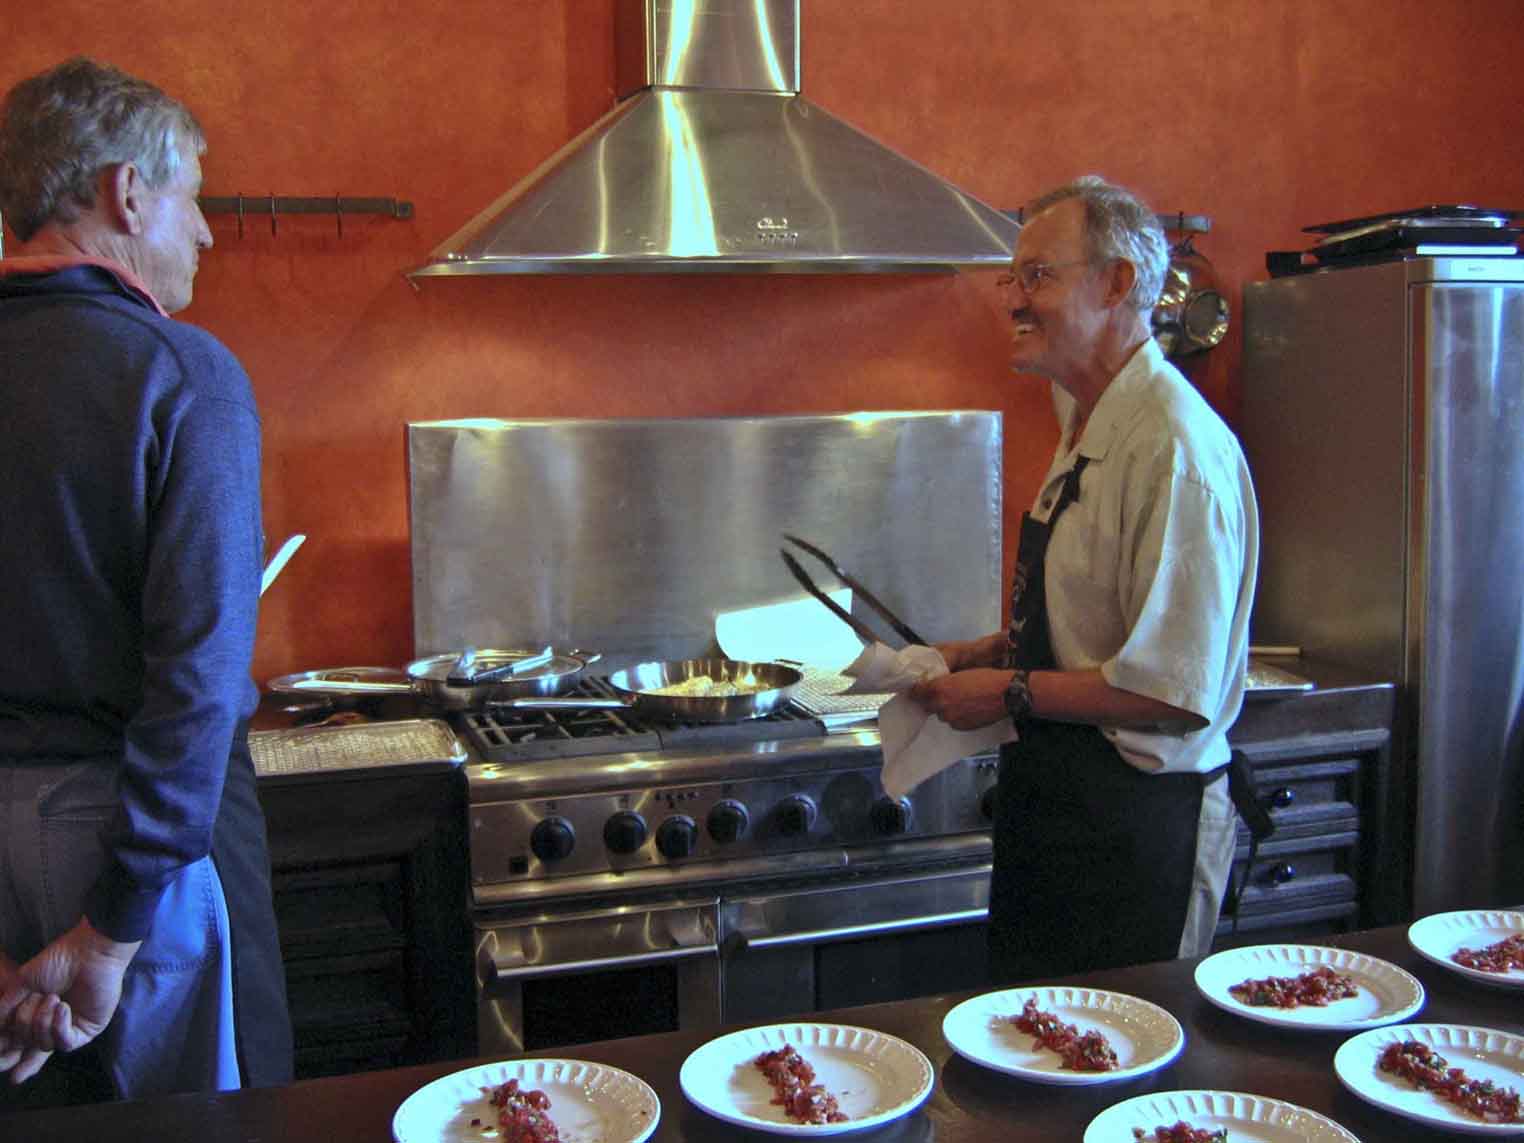 Hugh Carpenter instructs at his cooking school, Camp San Miguel